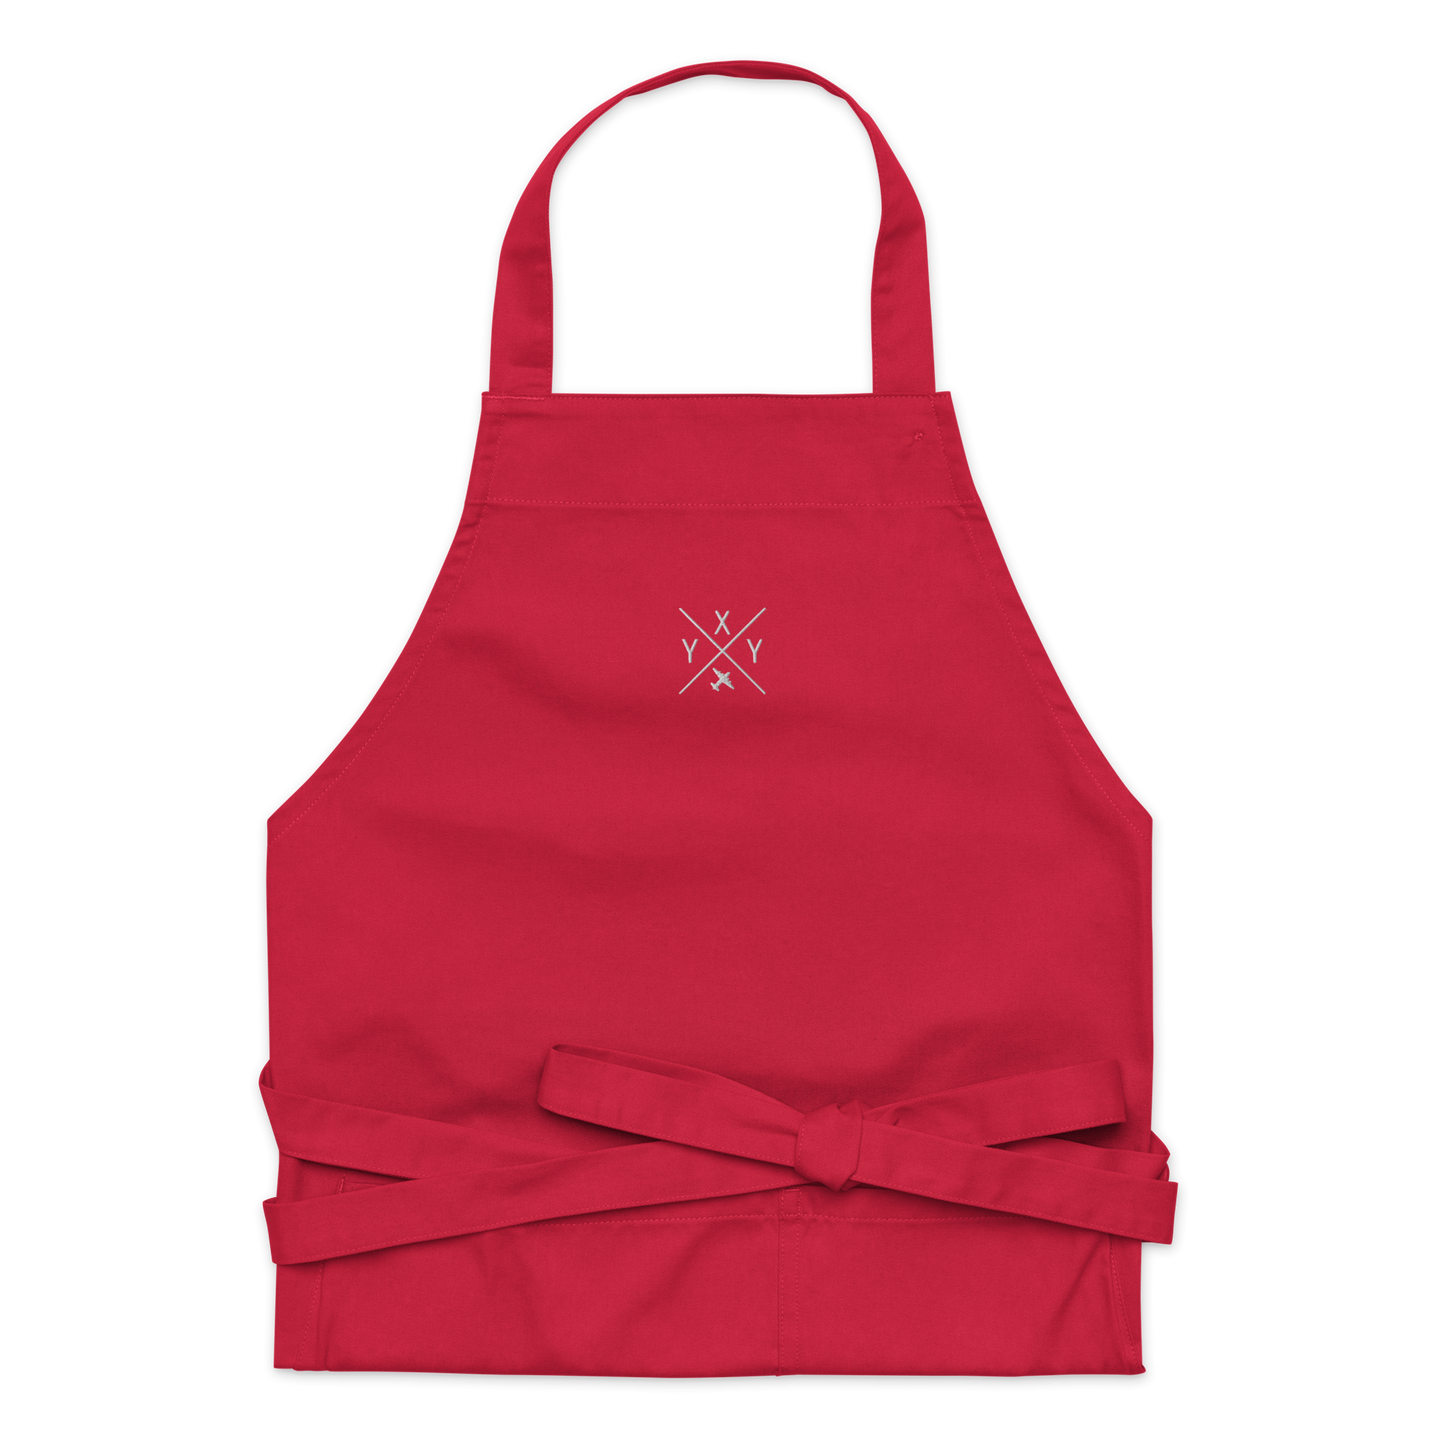 YHM Designs - YXY Whitehorse Organic Cotton Apron - Crossed-X Design with Airport Code and Vintage Propliner - White Embroidery - Image 05